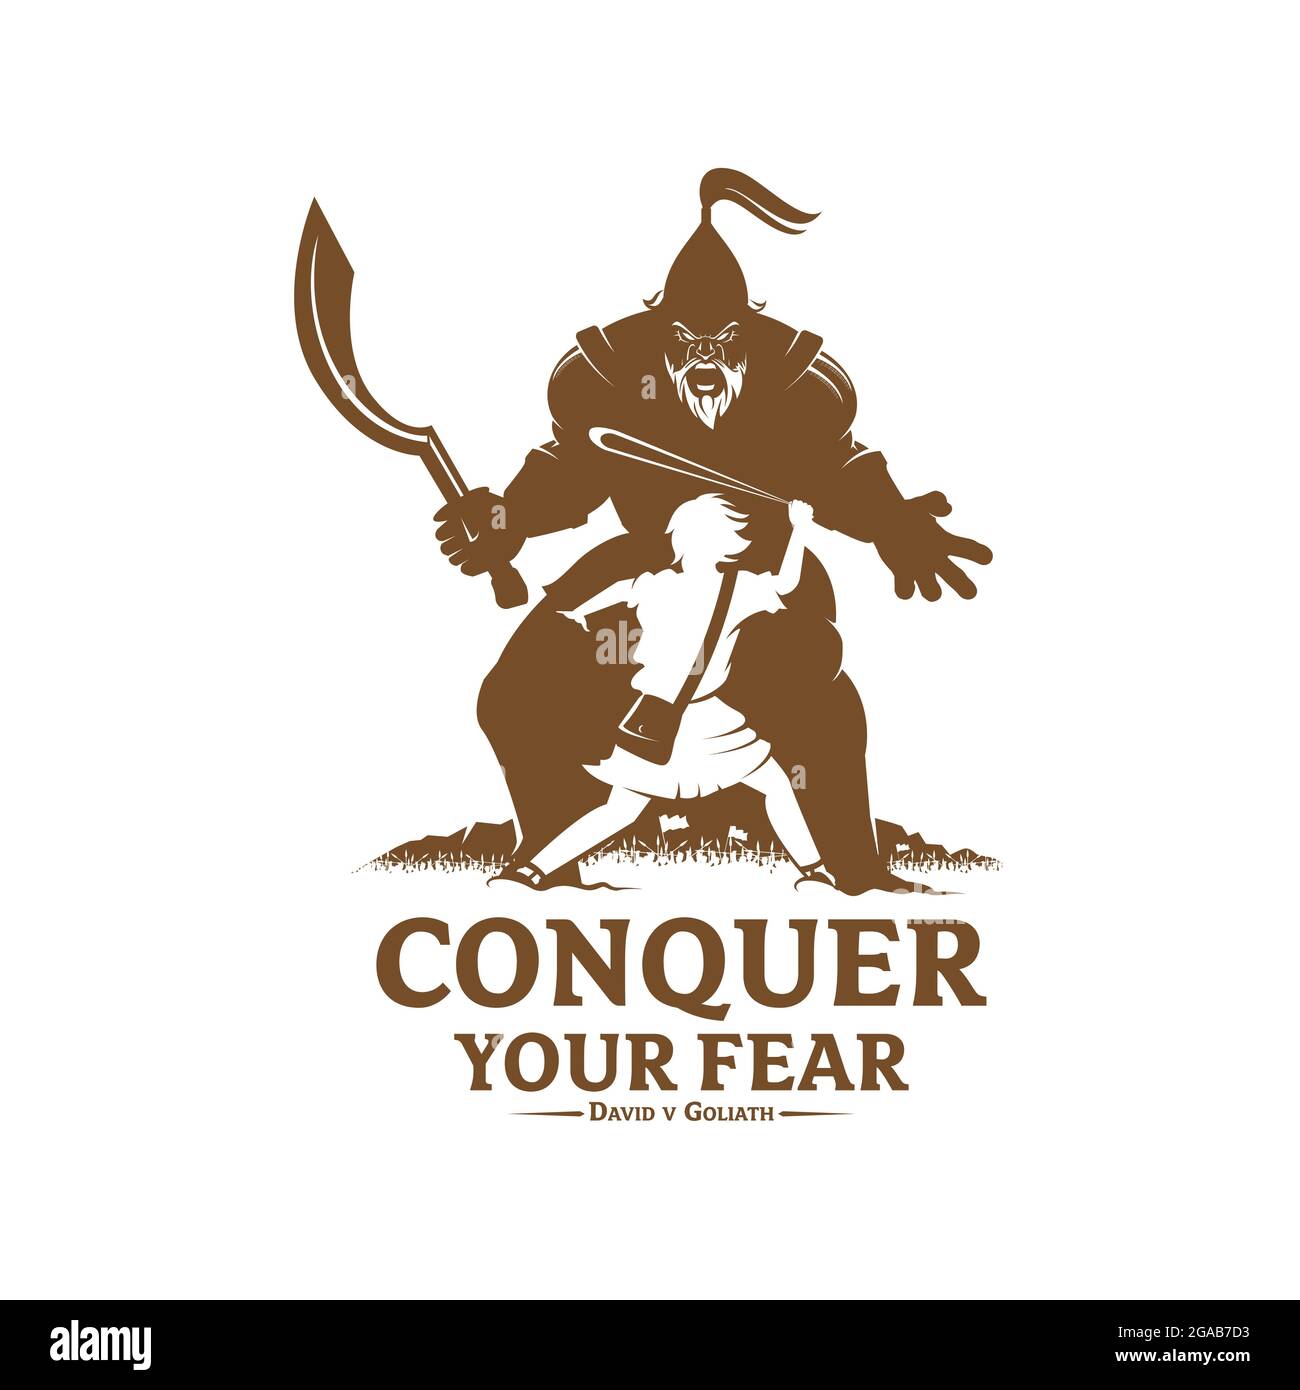 Conquer your fear David and Goliath concept vector illustration monochrome version for logo t-shirt design or any other purpose Stock Vector